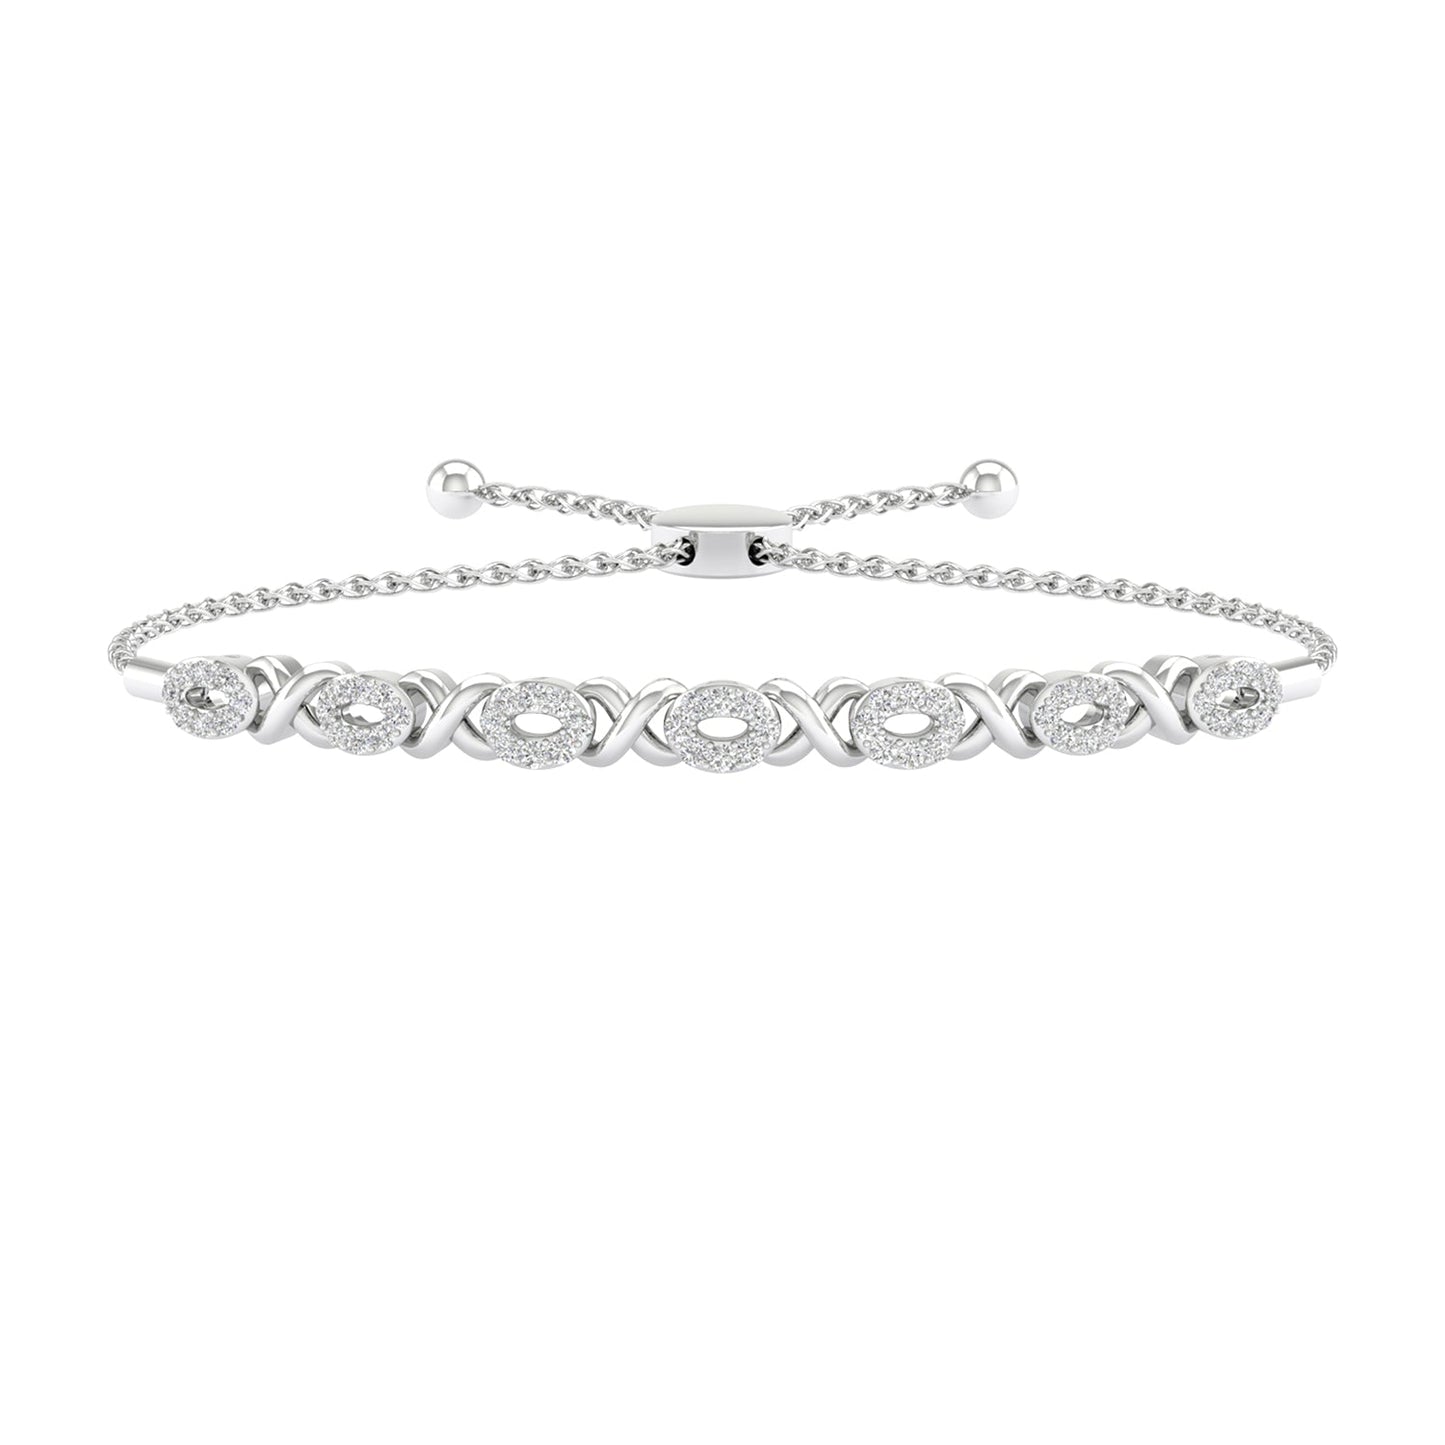 Darling Bolo Bracelet_Product Angle_1/4 Ct. - 1